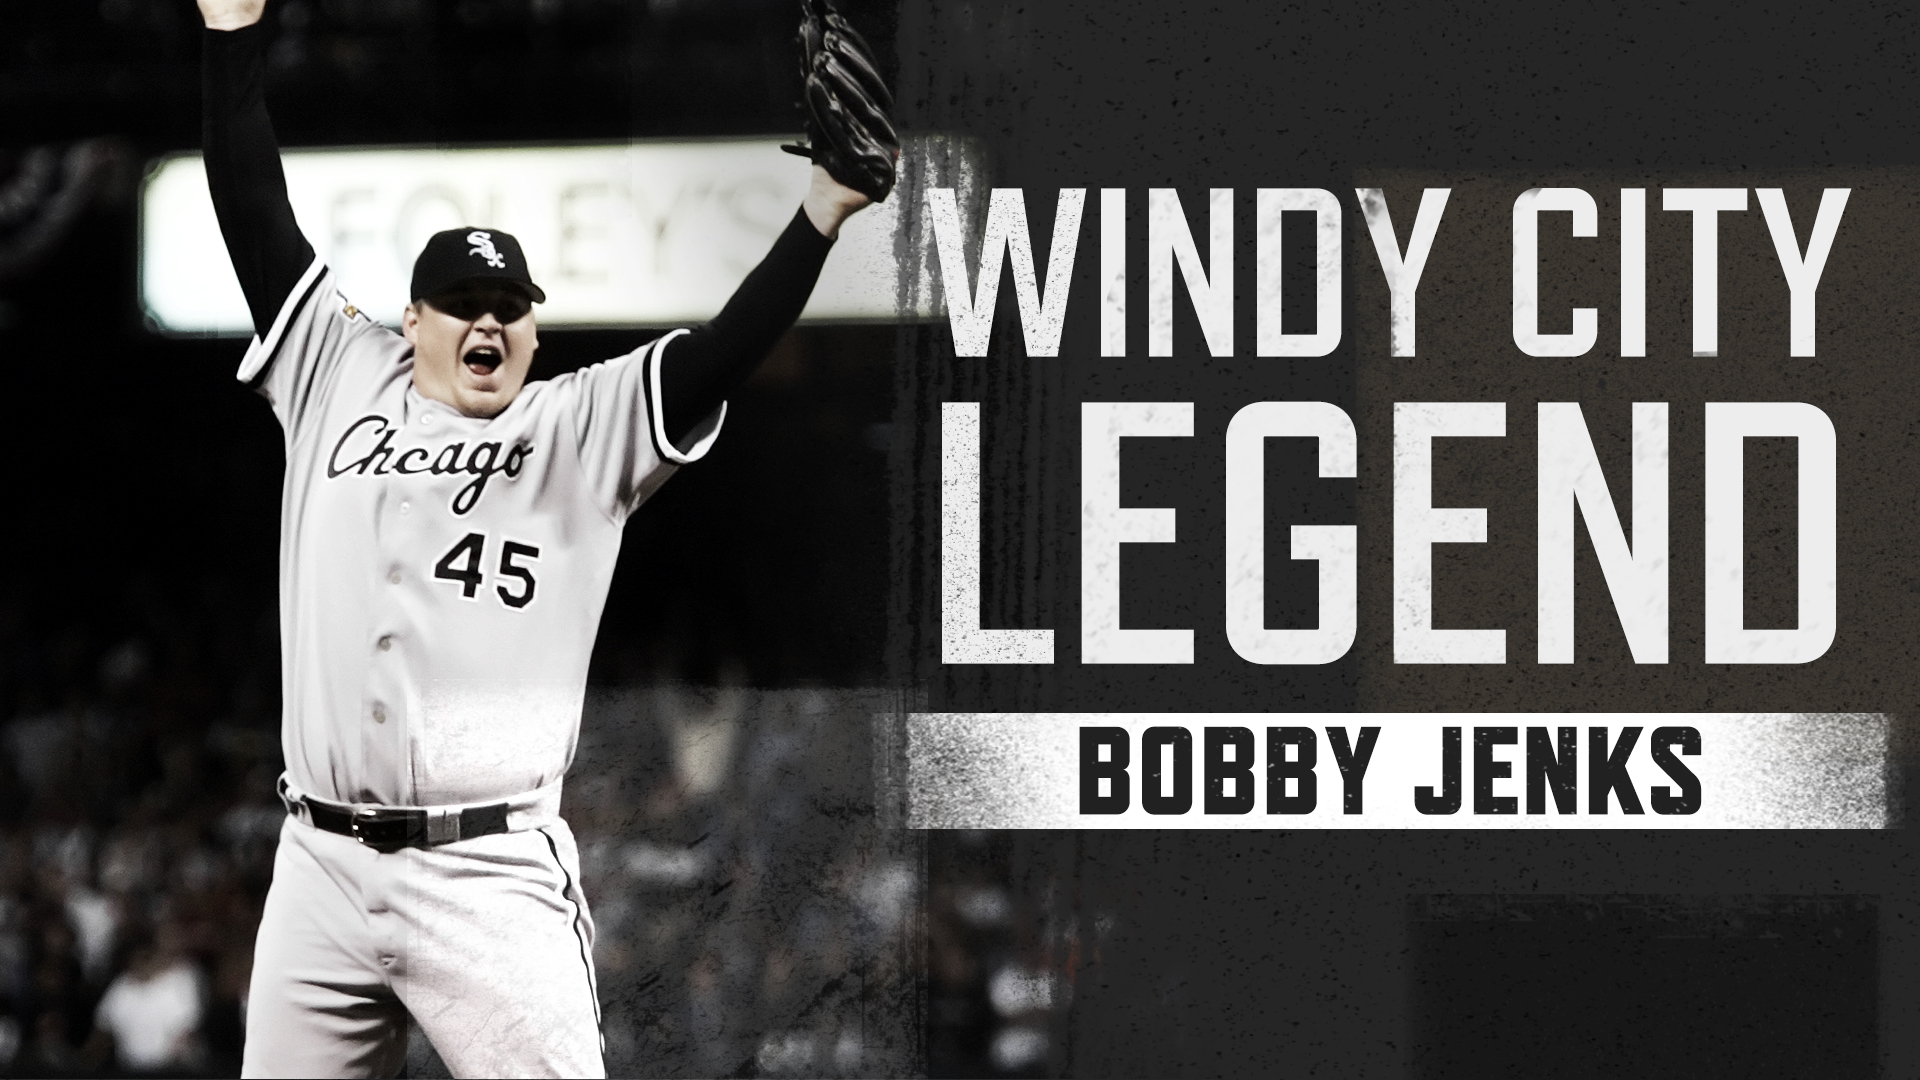 Bobby Jenks earns Windy City Legends honors after 2005 run – NBC